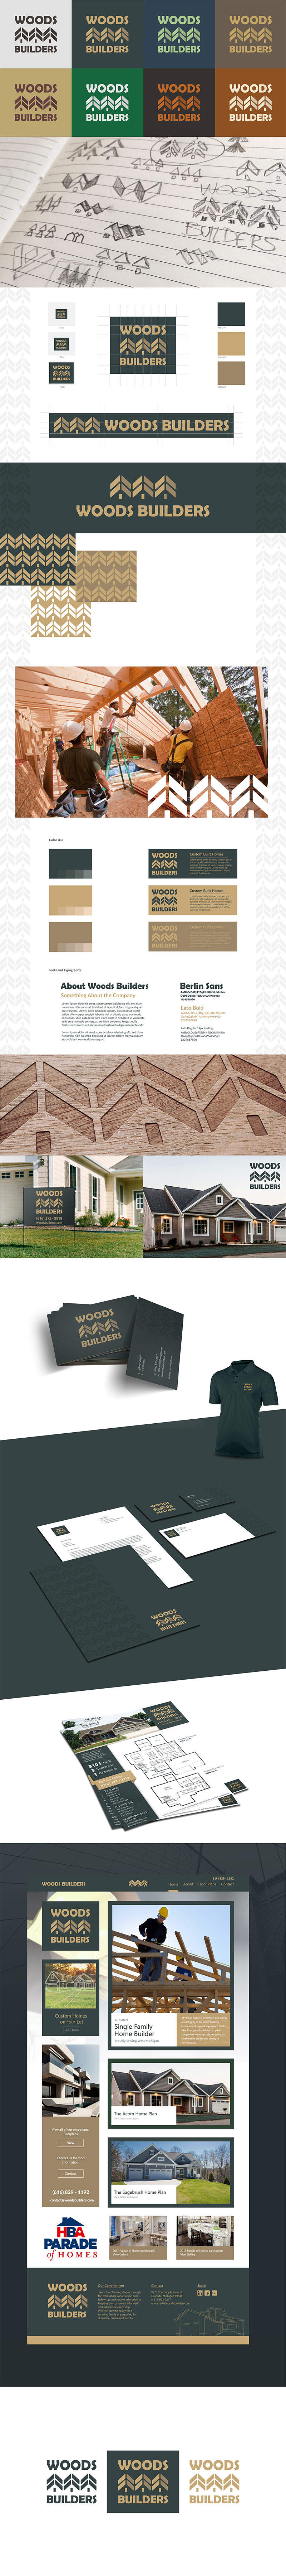 Woods builder's brand presentation showcasing new logo design, color use, typography and mockups